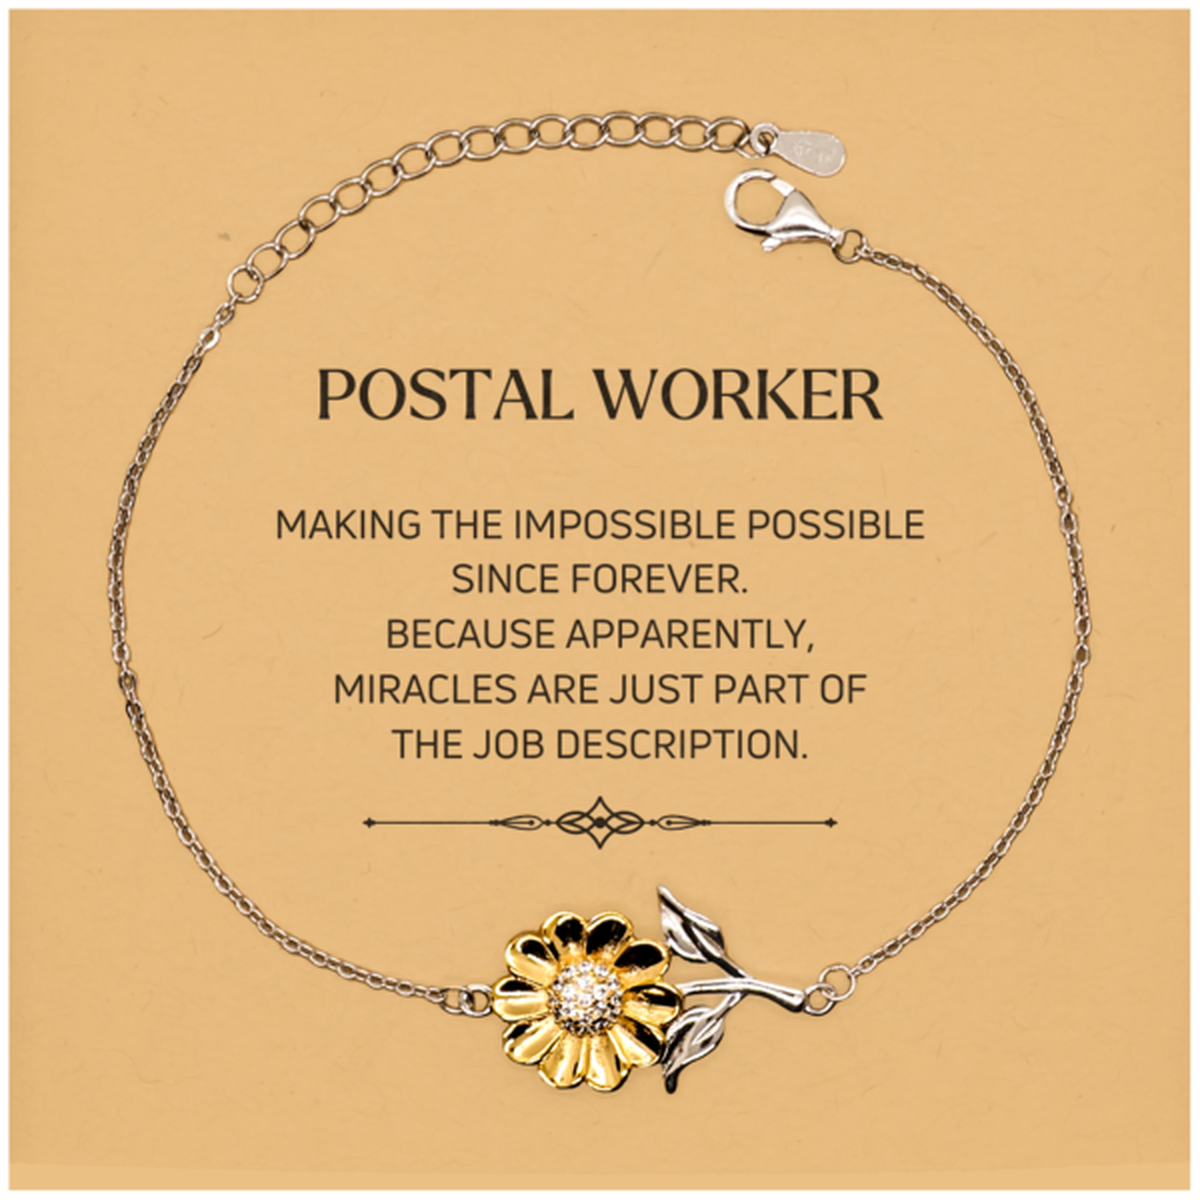 Funny Postal Worker Gifts, Miracles are just part of the job description, Inspirational Birthday Christmas Sunflower Bracelet For Postal Worker, Men, Women, Coworkers, Friends, Boss